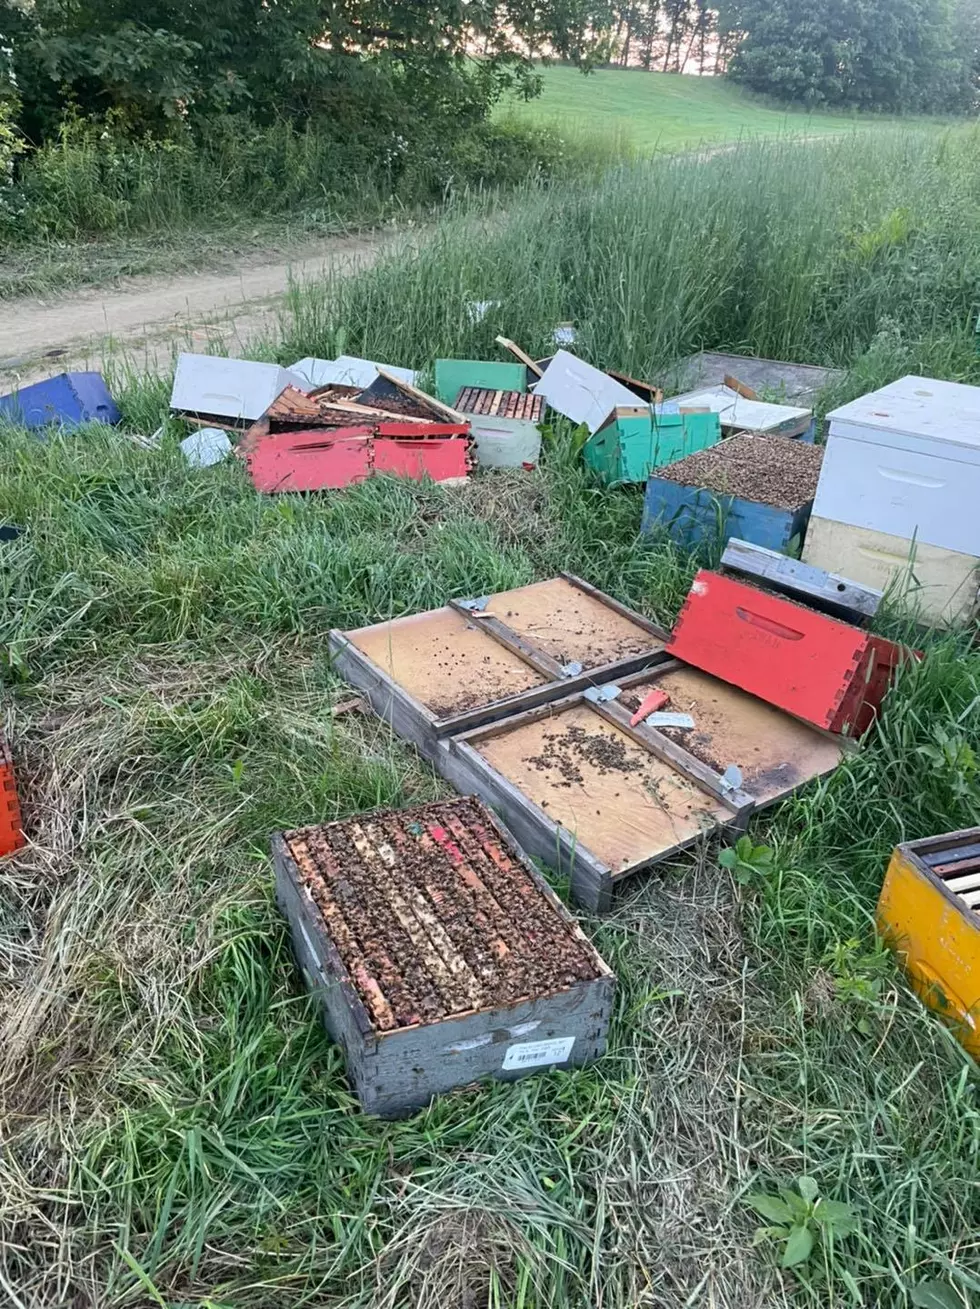 Vandals Do Thousands in Damage to Central Maine Honey Farm